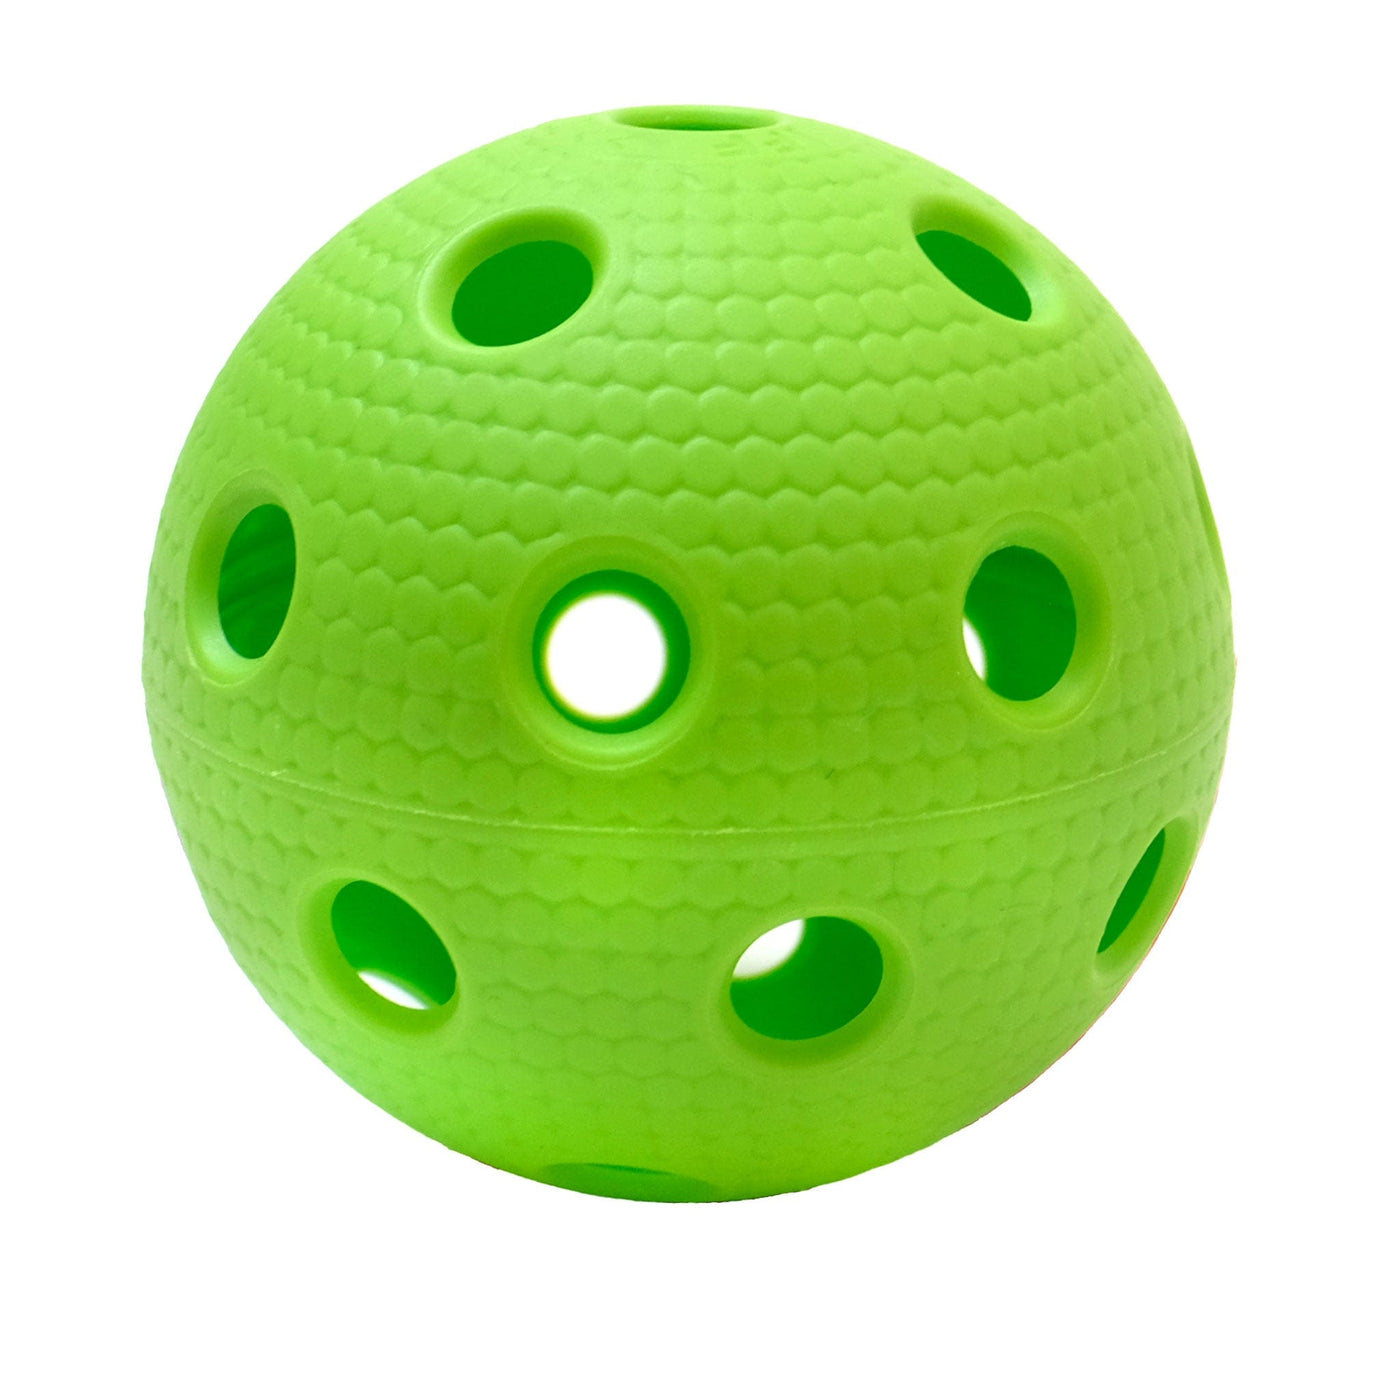 Small plastic ball used for Floorball. Floorball, pickleball, wiffle, wiffleball, plastic ball, ball with holes, ball with pock marks.